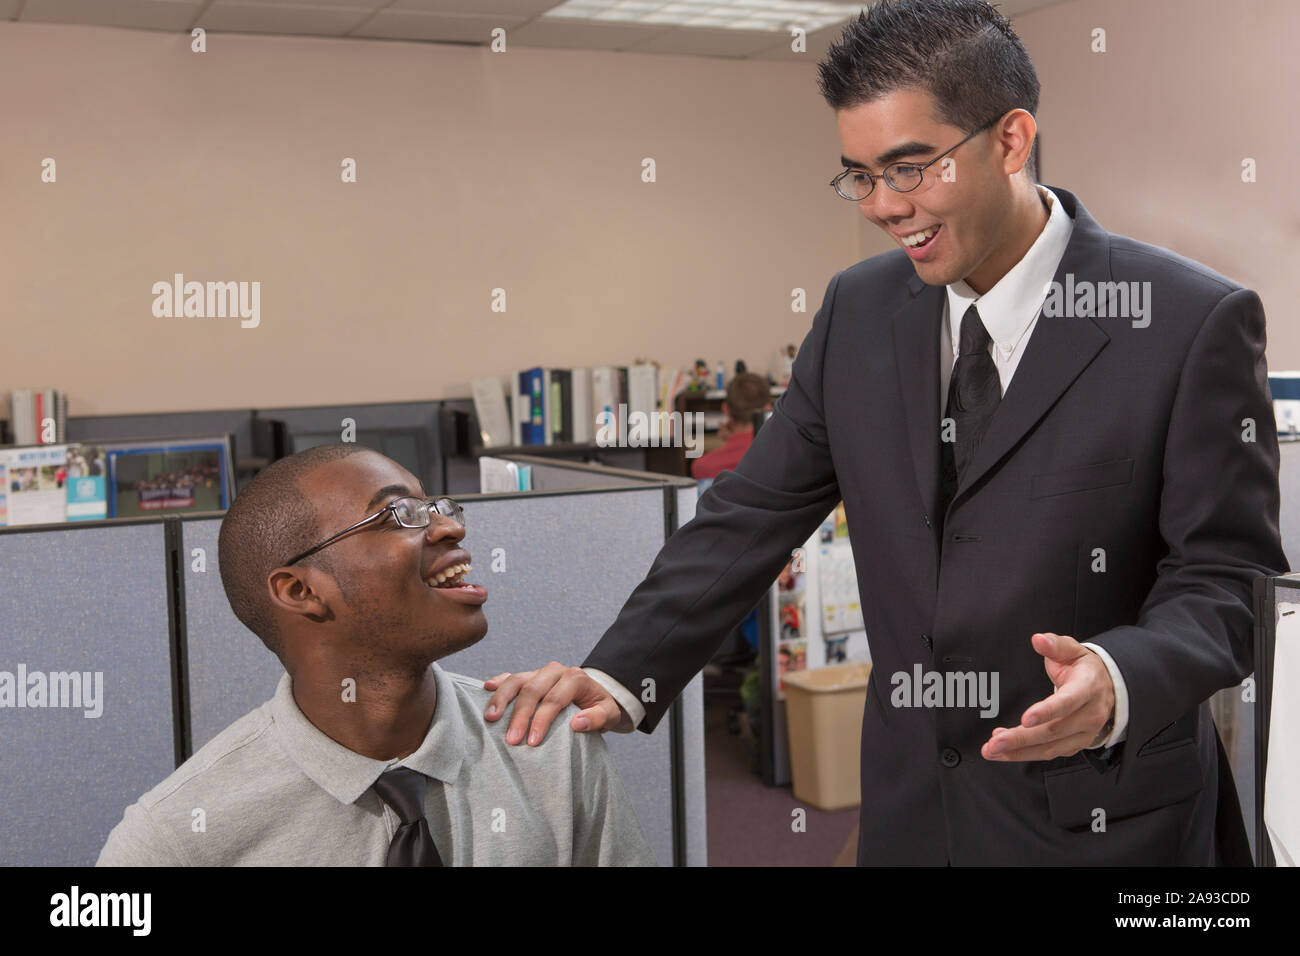 Two men with Autism talking and smiling in an office Stock Photo